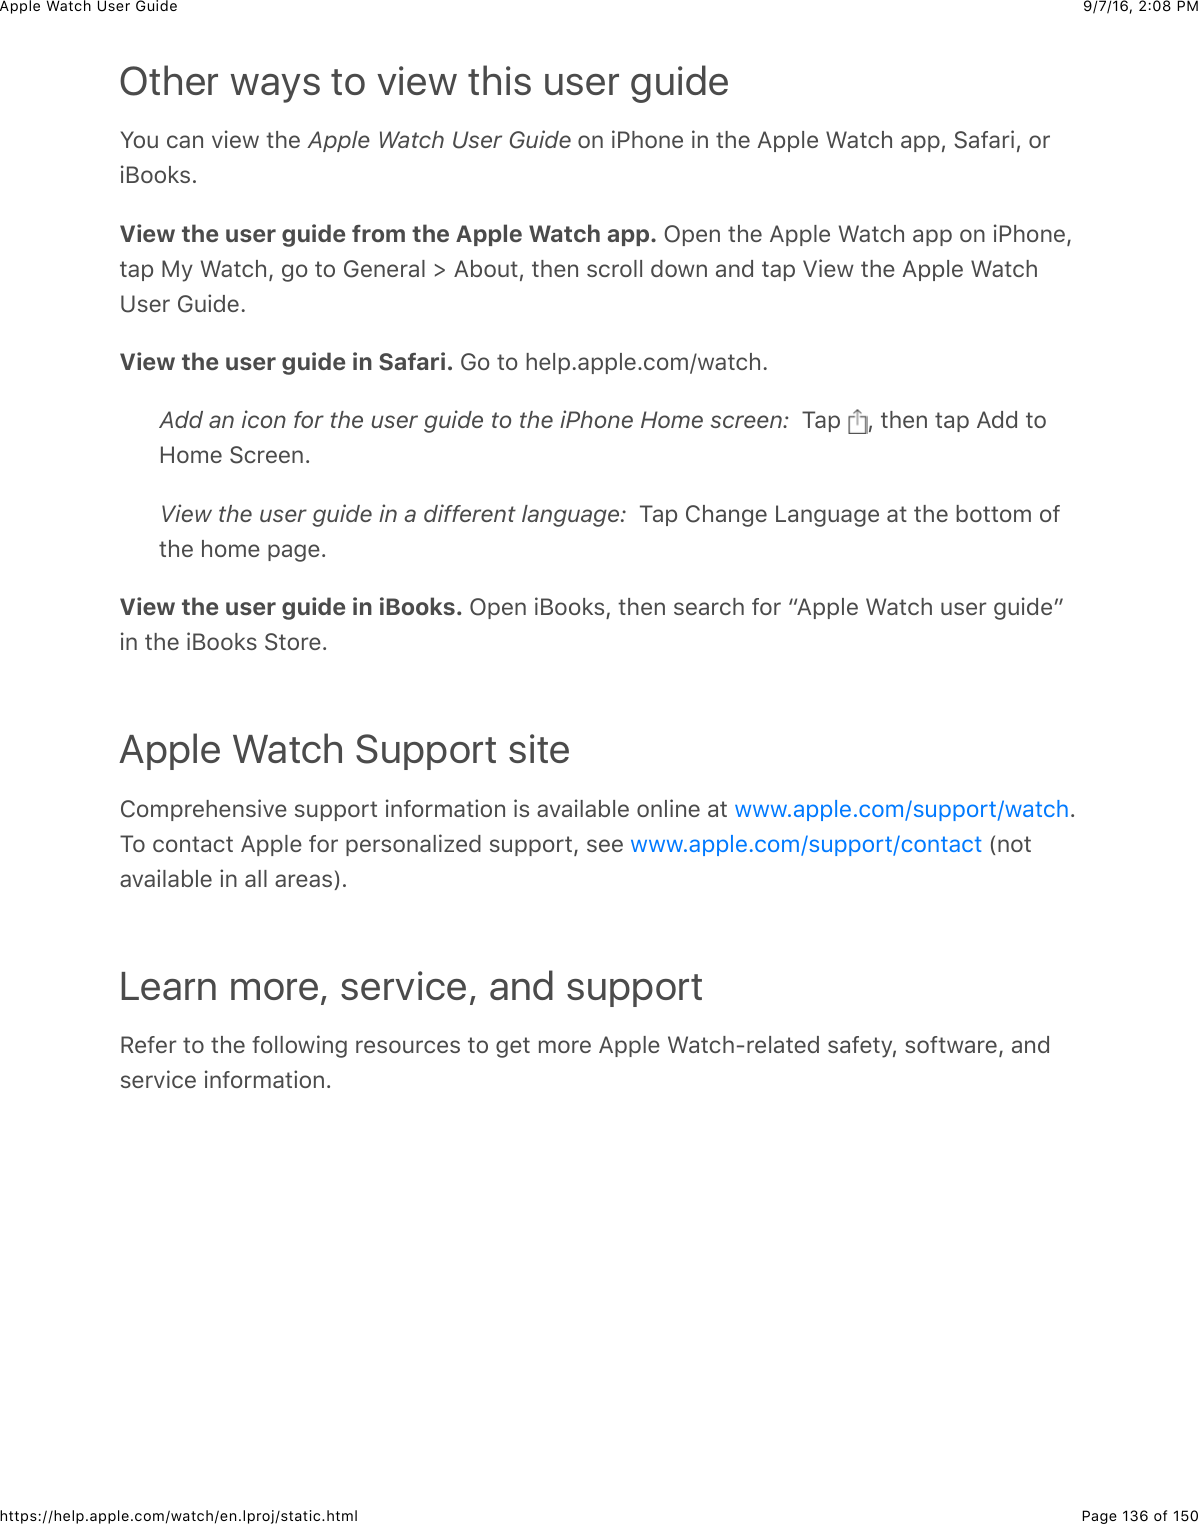 9/7/16, 2)08 PMApple Watch User GuidePage 136 of 150https://help.apple.com/watch/en.lproj/static.htmlOther ways to view this user guideS#4&amp;(&apos;,&amp;.+%7&amp;3)%&amp;Apple Watch User Guide&amp;#,&amp;+G)#,%&amp;+,&amp;3)%&amp;=22&quot;%&amp;&gt;&apos;3()&amp;&apos;22J&amp;6&apos;@&apos;*+J&amp;#*+;##8$CView the user guide from the Apple Watch app. L2%,&amp;3)%&amp;=22&quot;%&amp;&gt;&apos;3()&amp;&apos;22&amp;#,&amp;+G)#,%J3&apos;2&amp;F/&amp;&gt;&apos;3()J&amp;-#&amp;3#&amp;D%,%*&apos;&quot;&amp;d&amp;=B#43J&amp;3)%,&amp;$(*#&quot;&quot;&amp;0#7,&amp;&apos;,0&amp;3&apos;2&amp;_+%7&amp;3)%&amp;=22&quot;%&amp;&gt;&apos;3()K$%*&amp;D4+0%CView the user guide in Safari. D#&amp;3#&amp;)%&quot;2C&apos;22&quot;%C(#5o7&apos;3()CAdd an icon for the user guide to the iPhone Home screen:  1&apos;2&amp; J&amp;3)%,&amp;3&apos;2&amp;=00&amp;3#9#5%&amp;6(*%%,CView the user guide in a different language:  1&apos;2&amp;!)&apos;,-%&amp;&lt;&apos;,-4&apos;-%&amp;&apos;3&amp;3)%&amp;B#33#5&amp;#@3)%&amp;)#5%&amp;2&apos;-%CView the user guide in iBooks. L2%,&amp;+;##8$J&amp;3)%,&amp;$%&apos;*()&amp;@#*&amp;a=22&quot;%&amp;&gt;&apos;3()&amp;4$%*&amp;-4+0%b+,&amp;3)%&amp;+;##8$&amp;63#*%CApple Watch Support site!#52*%)%,$+.%&amp;$422#*3&amp;+,@#*5&apos;3+#,&amp;+$&amp;&apos;.&apos;+&quot;&apos;B&quot;%&amp;#,&quot;+,%&amp;&apos;3&amp; C1#&amp;(#,3&apos;(3&amp;=22&quot;%&amp;@#*&amp;2%*$#,&apos;&quot;+N%0&amp;$422#*3J&amp;$%%&amp; &amp;P,#3&apos;.&apos;+&quot;&apos;B&quot;%&amp;+,&amp;&apos;&quot;&quot;&amp;&apos;*%&apos;$RCLearn more, service, and supportH%@%*&amp;3#&amp;3)%&amp;@#&quot;&quot;#7+,-&amp;*%$#4*(%$&amp;3#&amp;-%3&amp;5#*%&amp;=22&quot;%&amp;&gt;&apos;3()?*%&quot;&apos;3%0&amp;$&apos;@%3/J&amp;$#@37&apos;*%J&amp;&apos;,0$%*.+(%&amp;+,@#*5&apos;3+#,C777C&apos;22&quot;%C(#5o$422#*3o7&apos;3()777C&apos;22&quot;%C(#5o$422#*3o(#,3&apos;(3